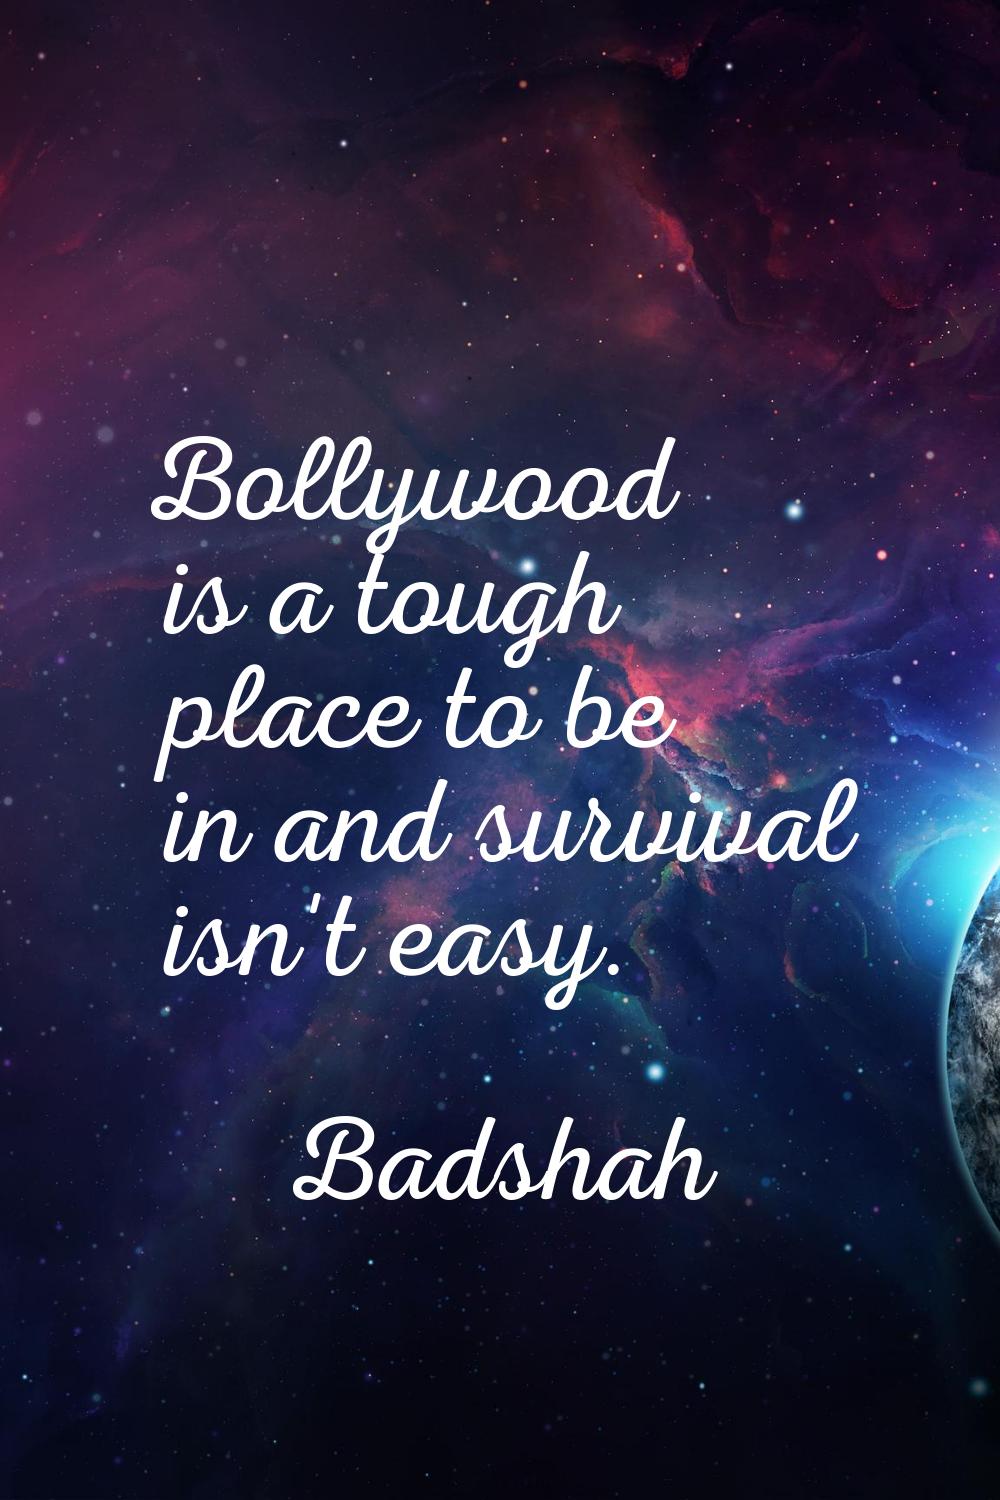 Bollywood is a tough place to be in and survival isn't easy.